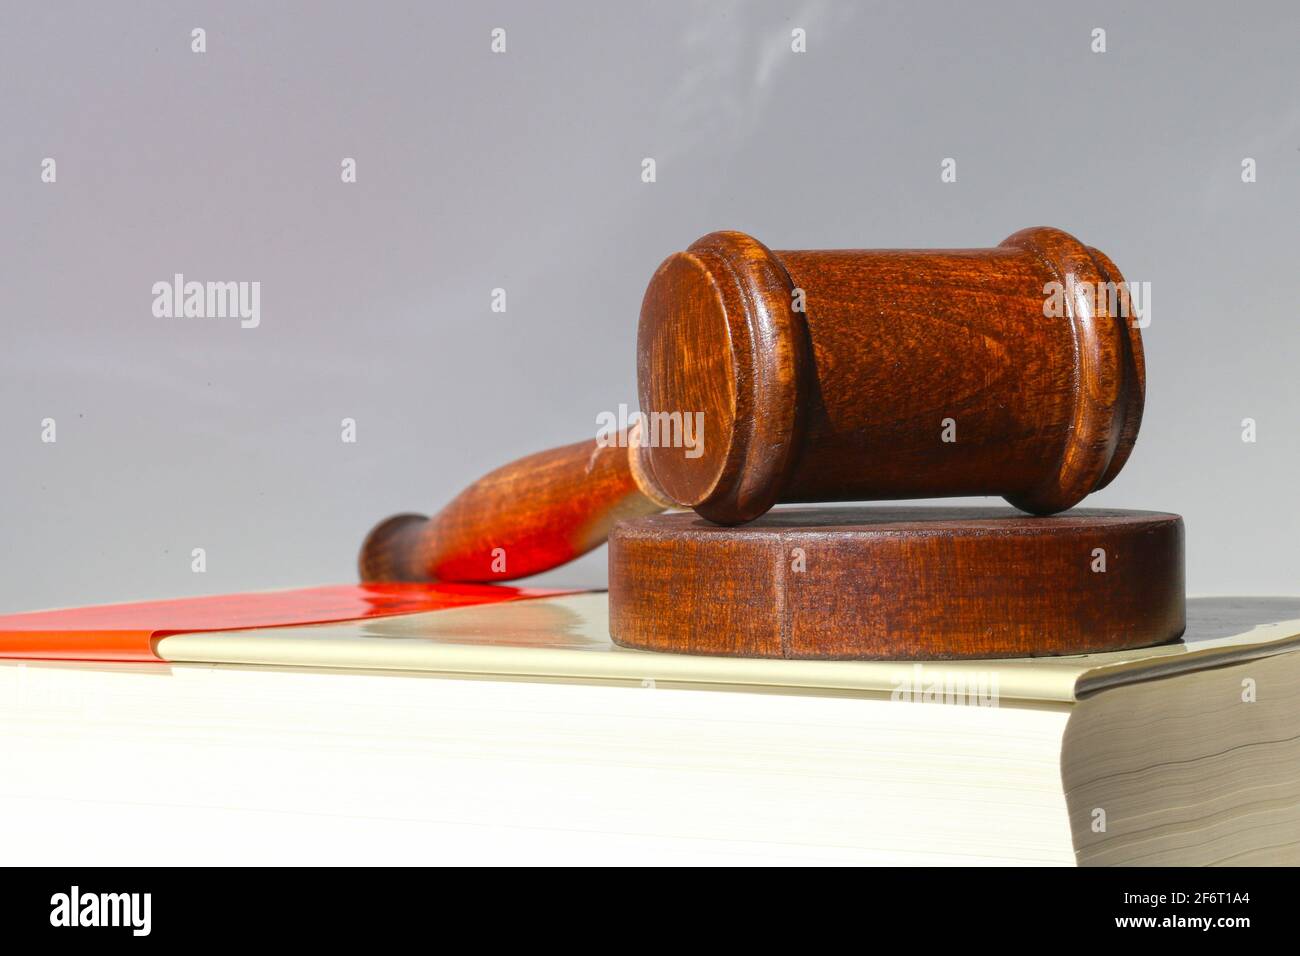 Book and judge's gavel as a symbol image for a court verdict. Stock Photo